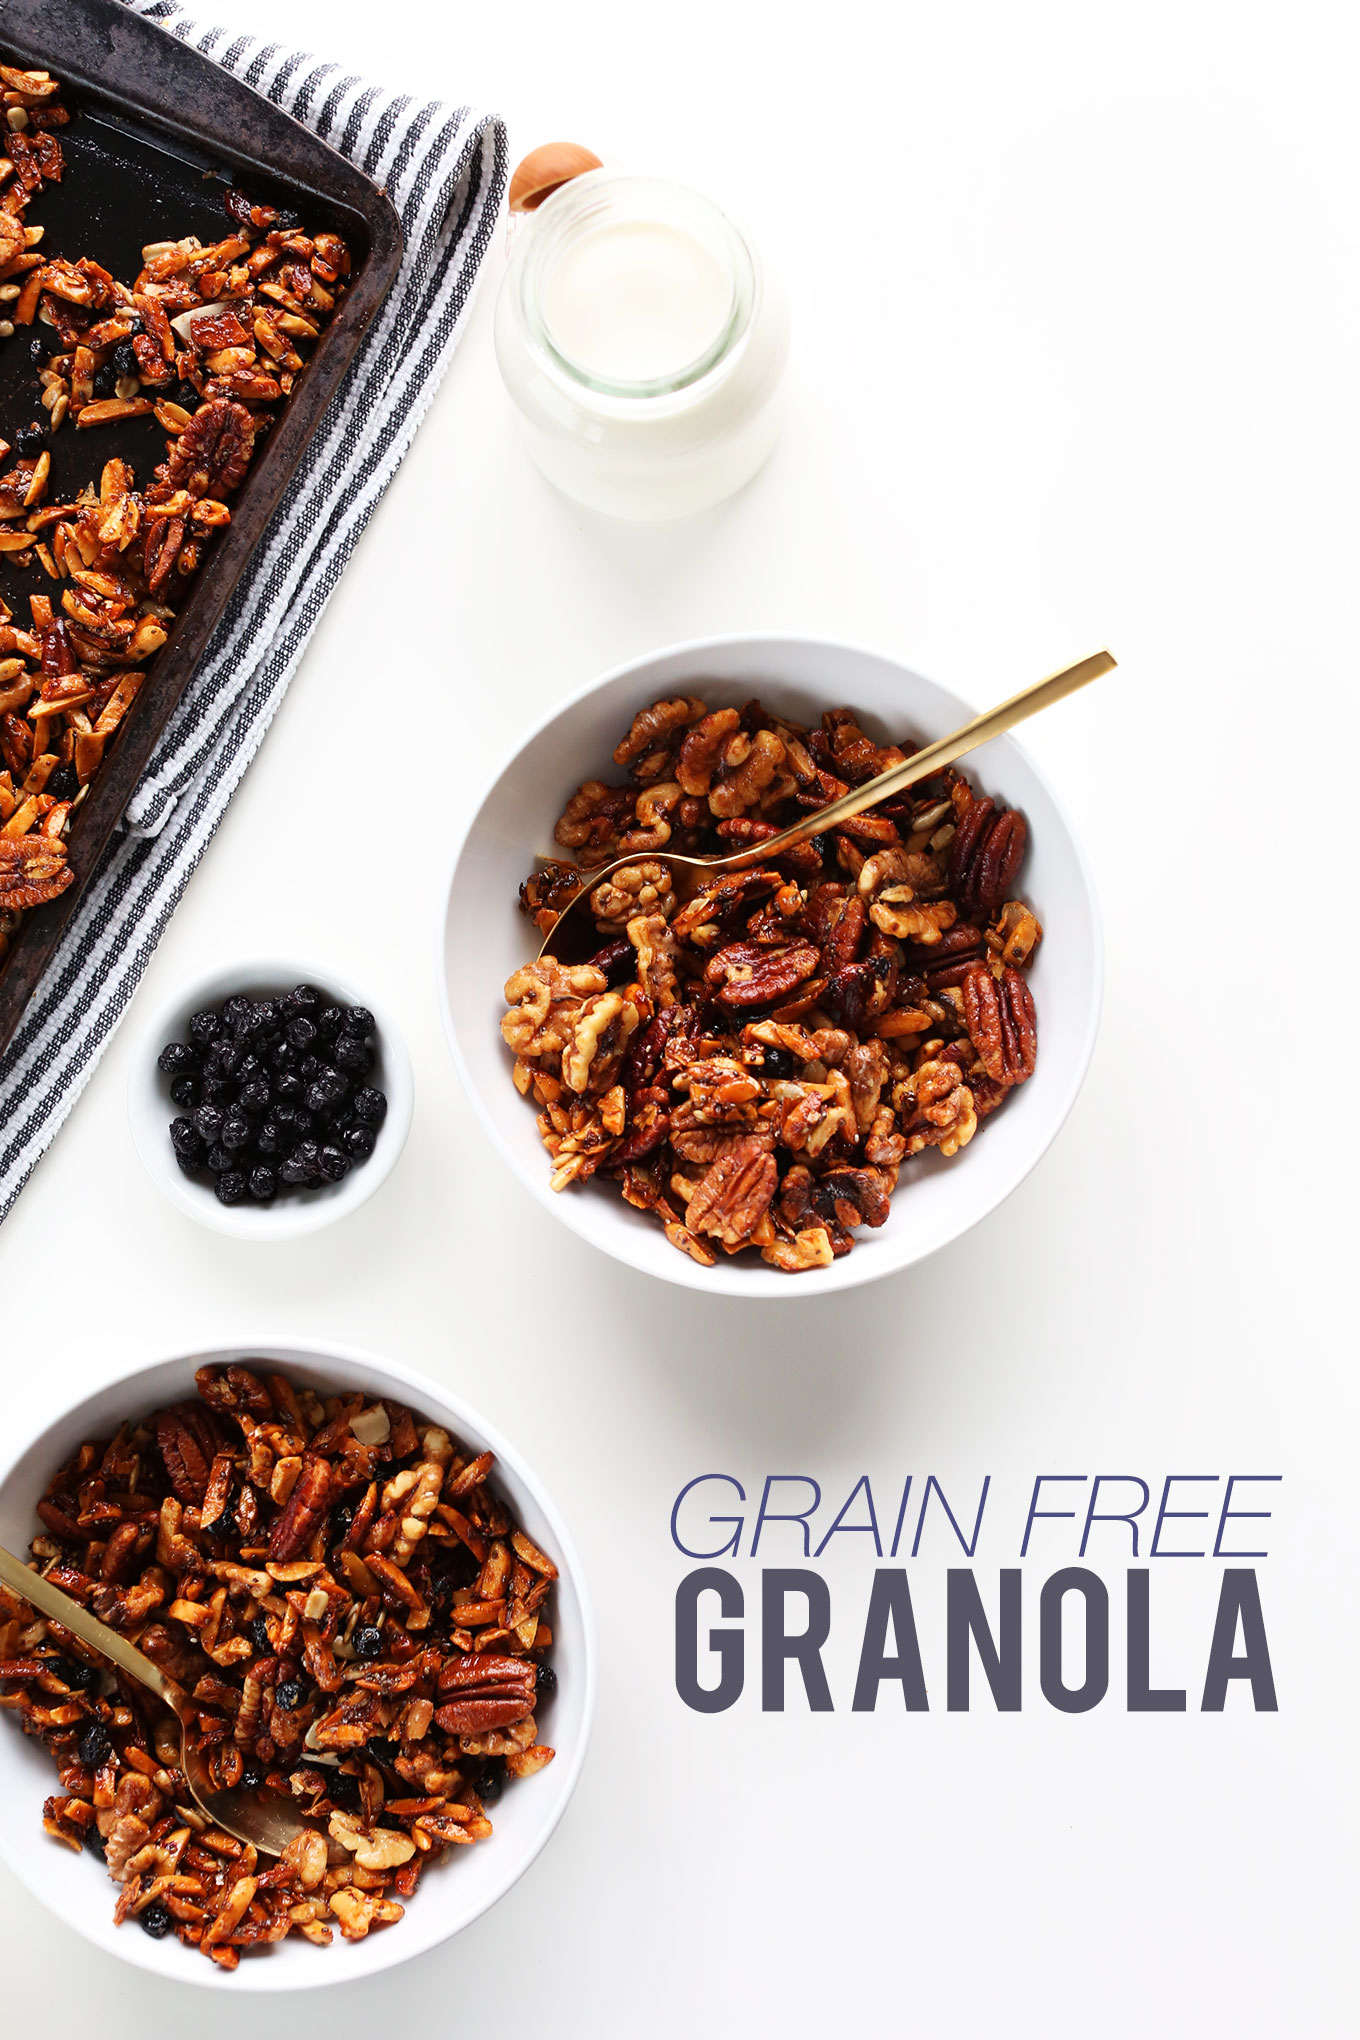 Bowls of our delicious Grain-Free Granola for a naturally-sweetened vegan breakfast